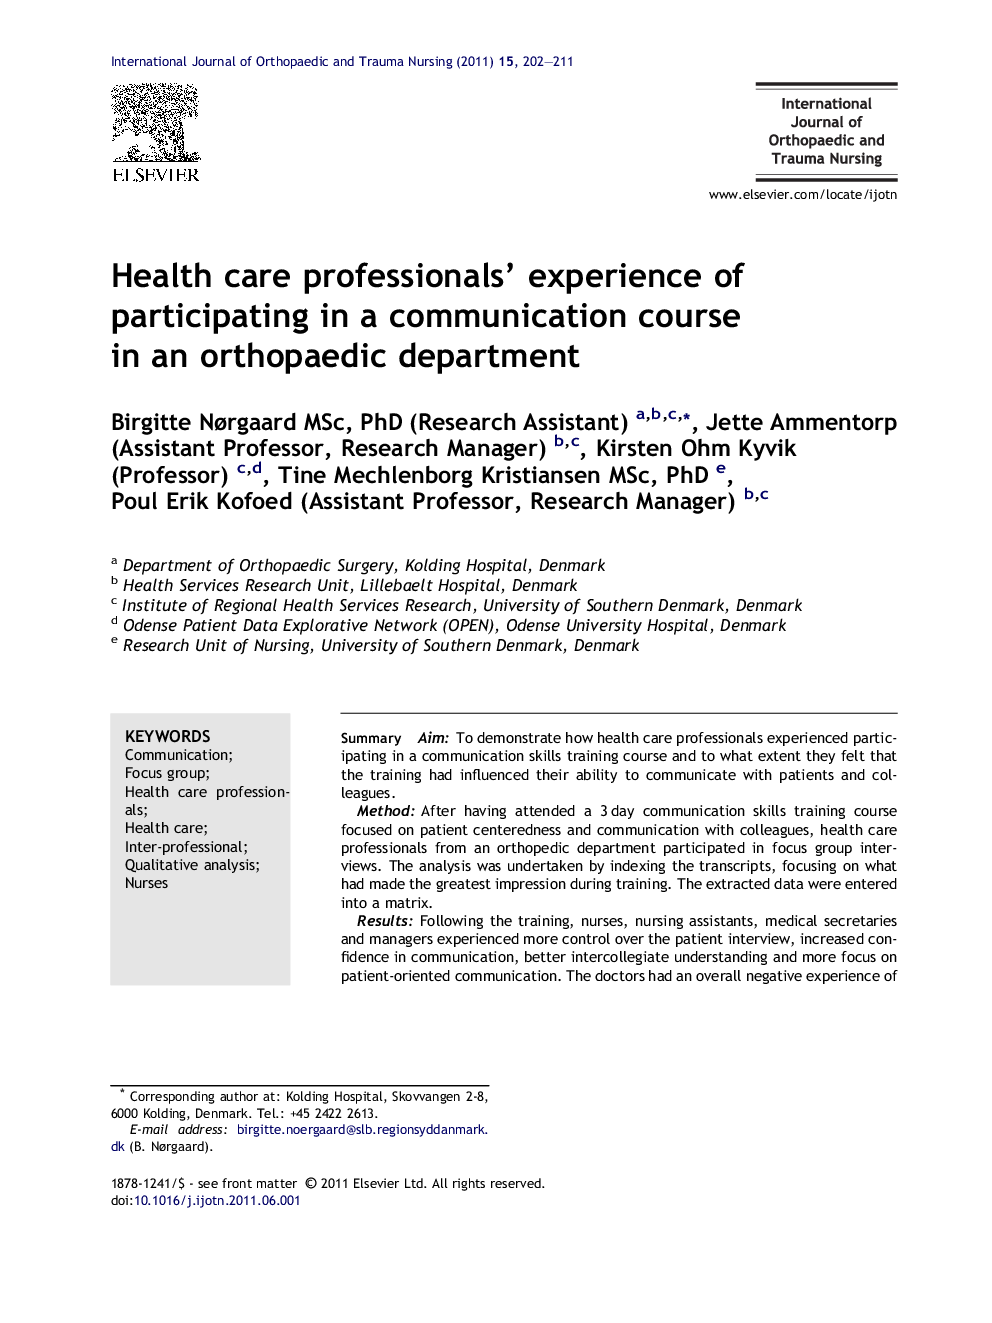 Health care professionals’ experience of participating in a communication course in an orthopaedic department